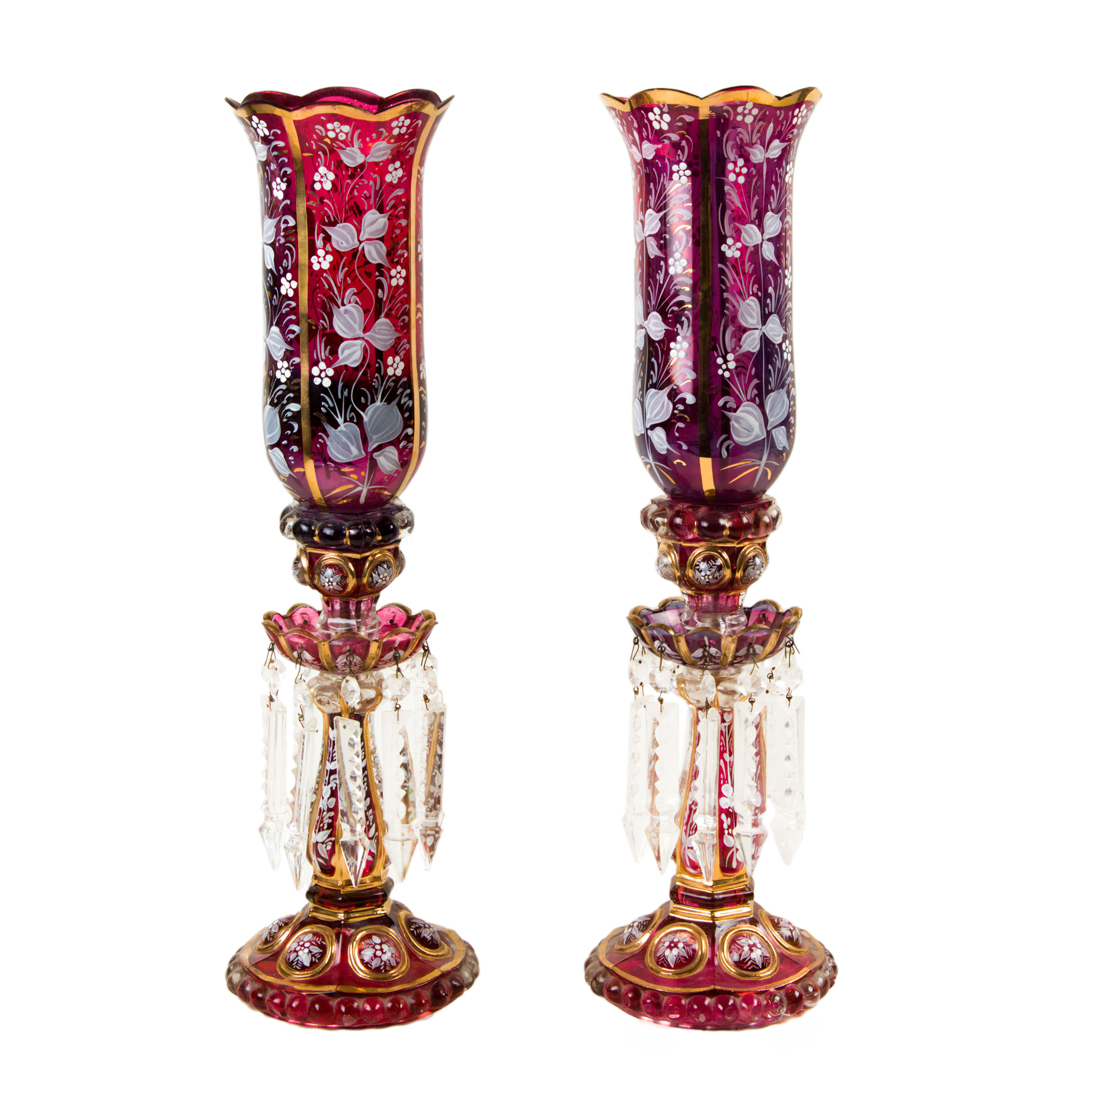 A PAIR OF BACCARAT STYLE ENAMELED AND